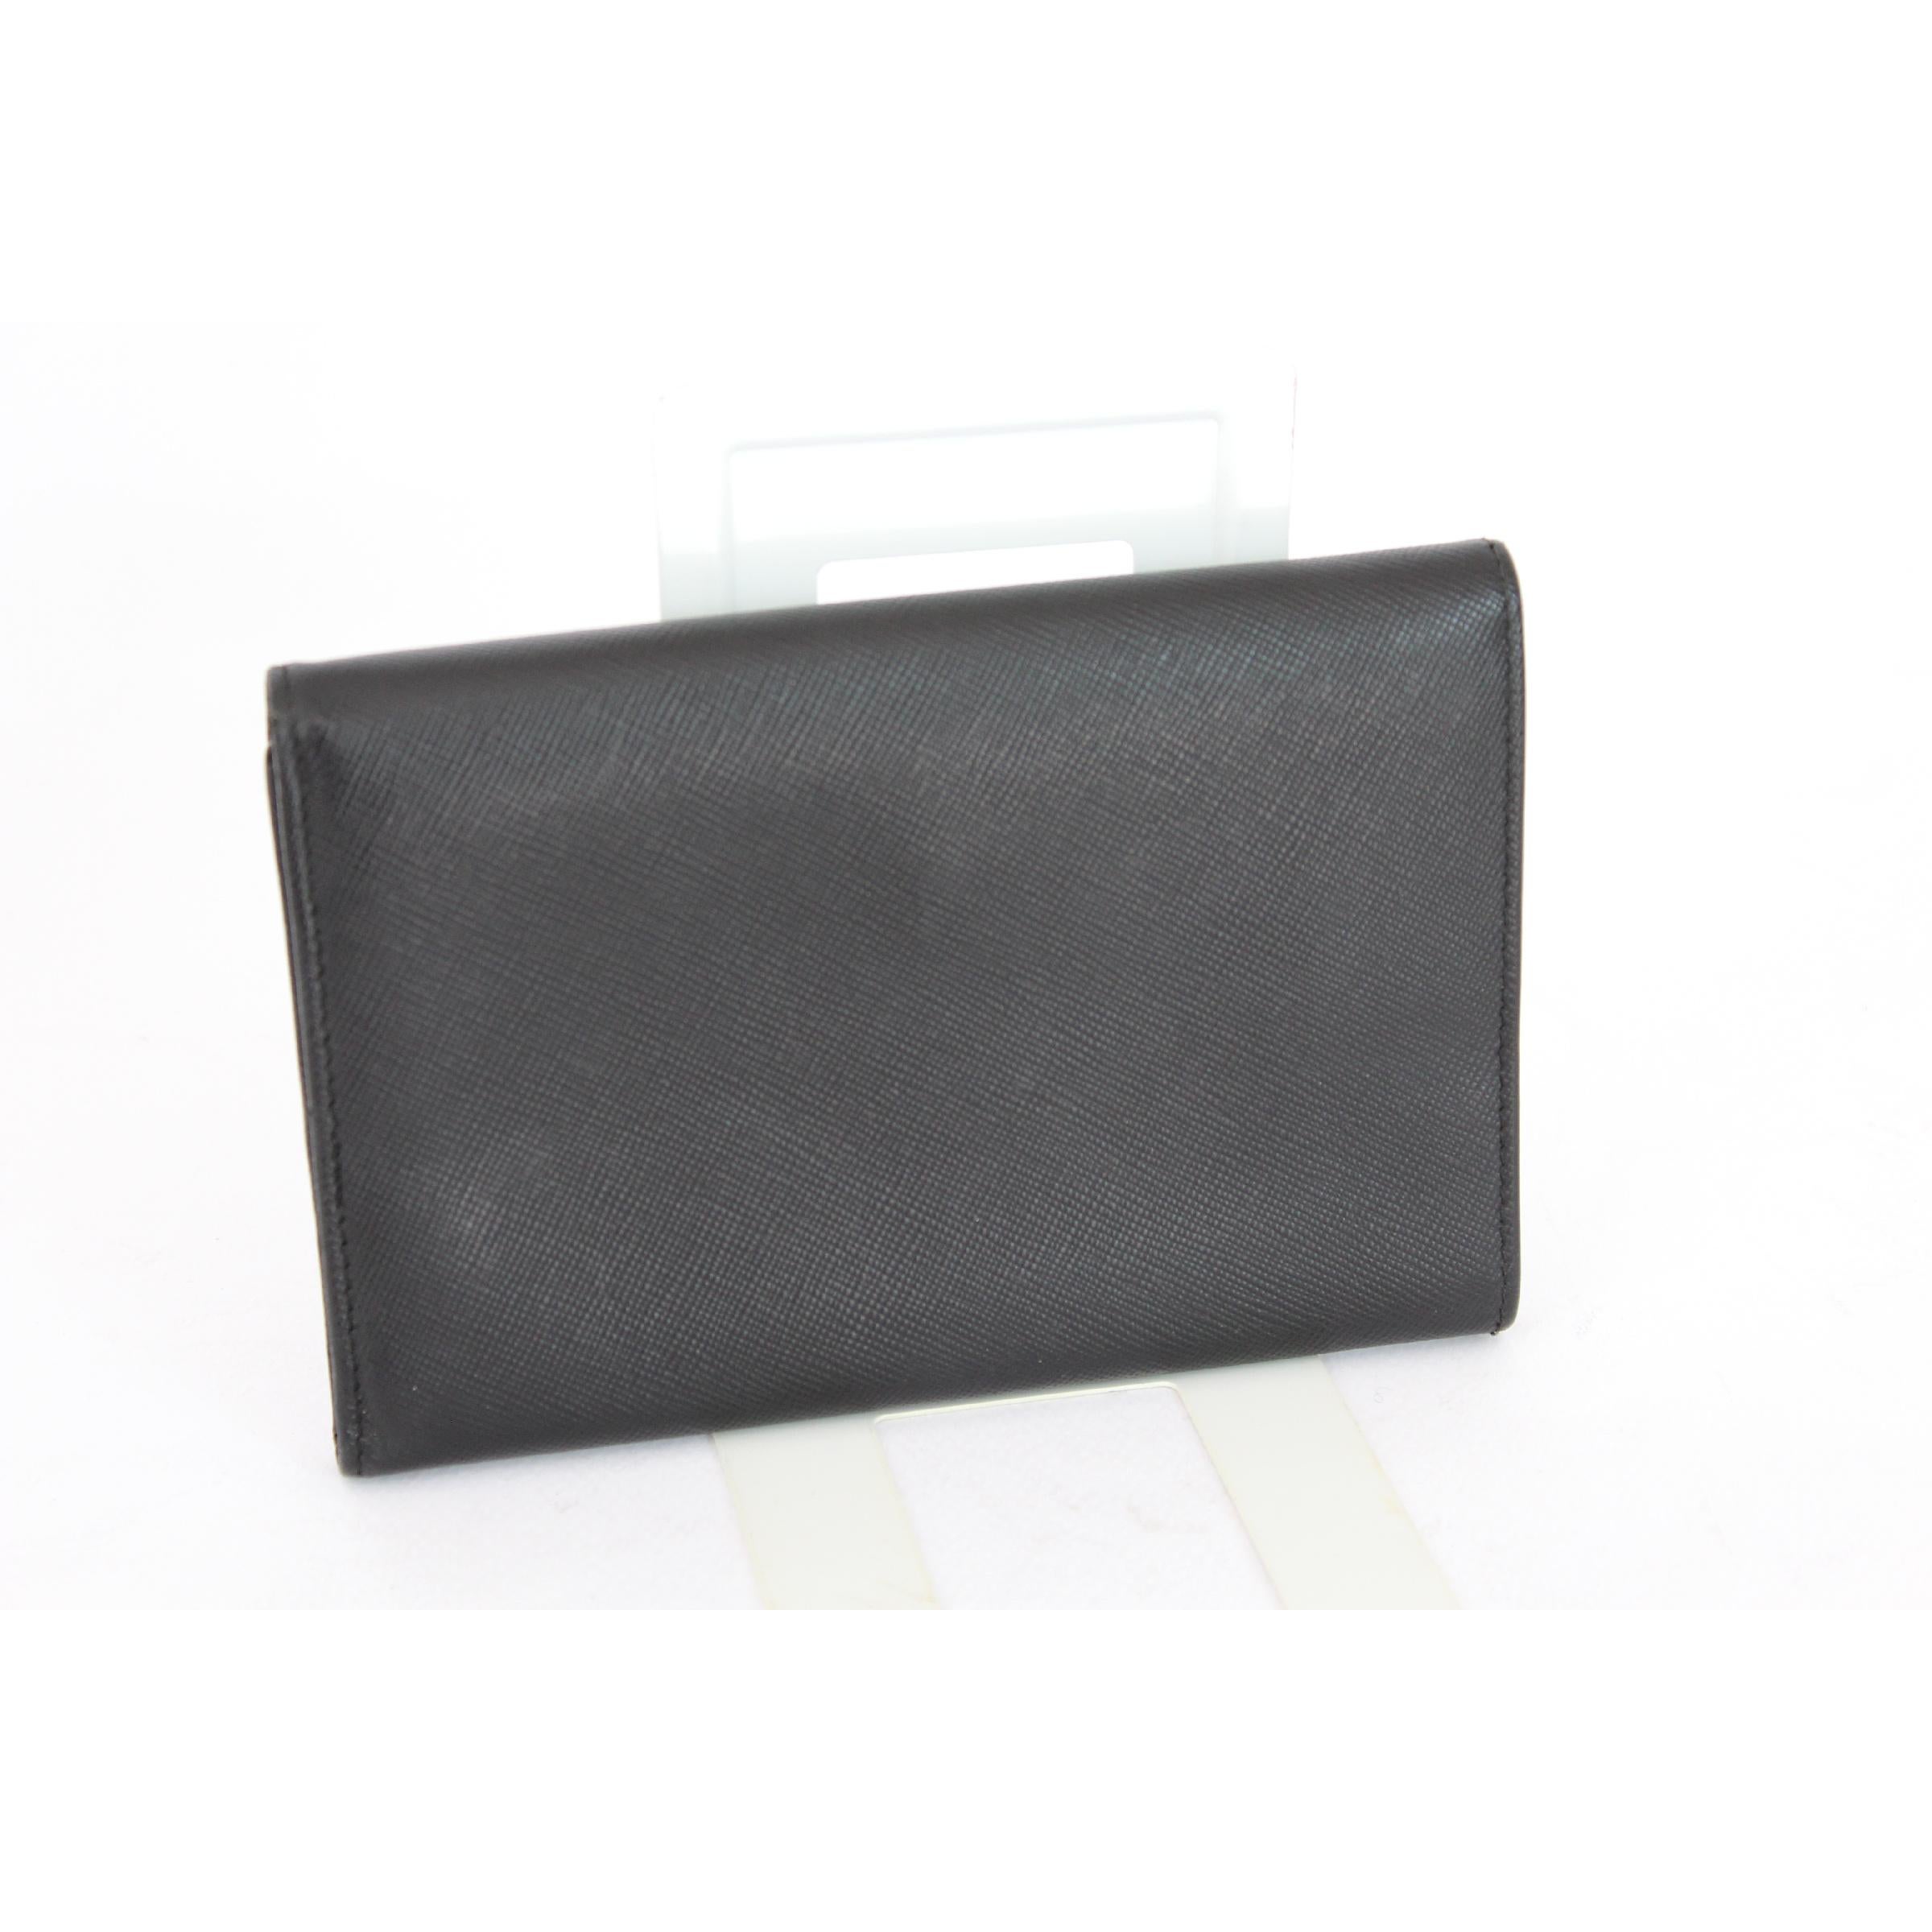 Prada Milano vintage women's wallet, 100% leather black. Internal dividers for various papers and documents, clip closure. Made in Italy. Excellent vintage conditions.

Length: 11 cm
Width: 15 cm
Depth: 1 cm